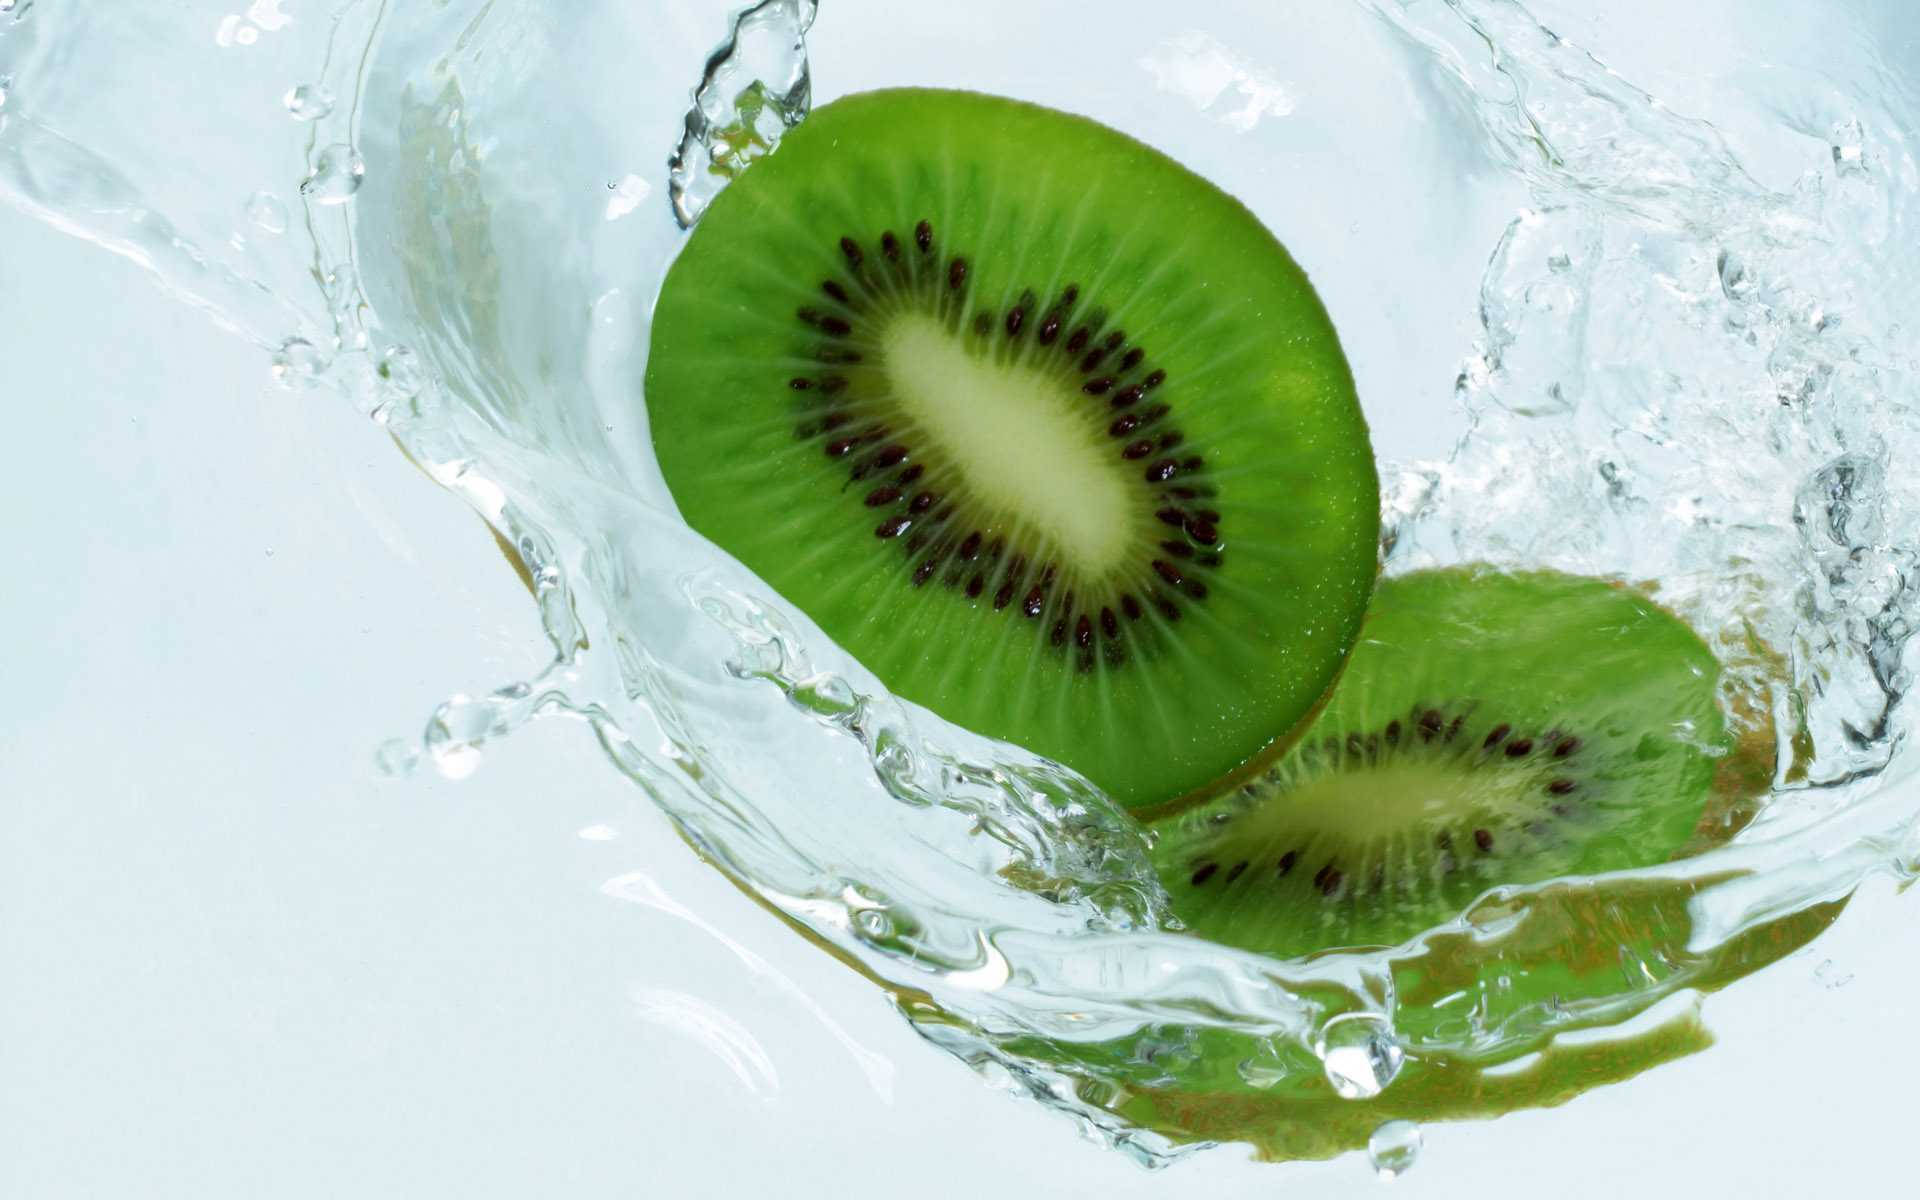 Remarkable Still Shot Of Two Kiwi Slices Showing Its Green Interiors Falling On Water